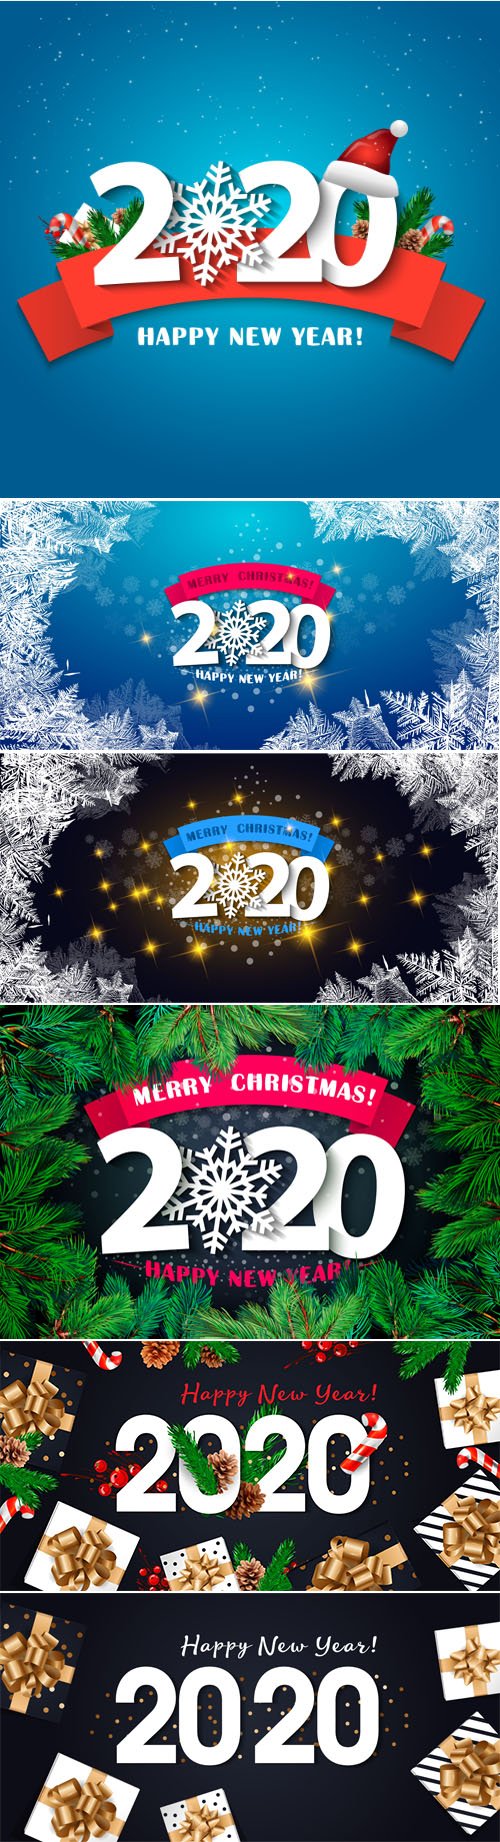 New Year 2020 Backgrounds Vector Collection 2